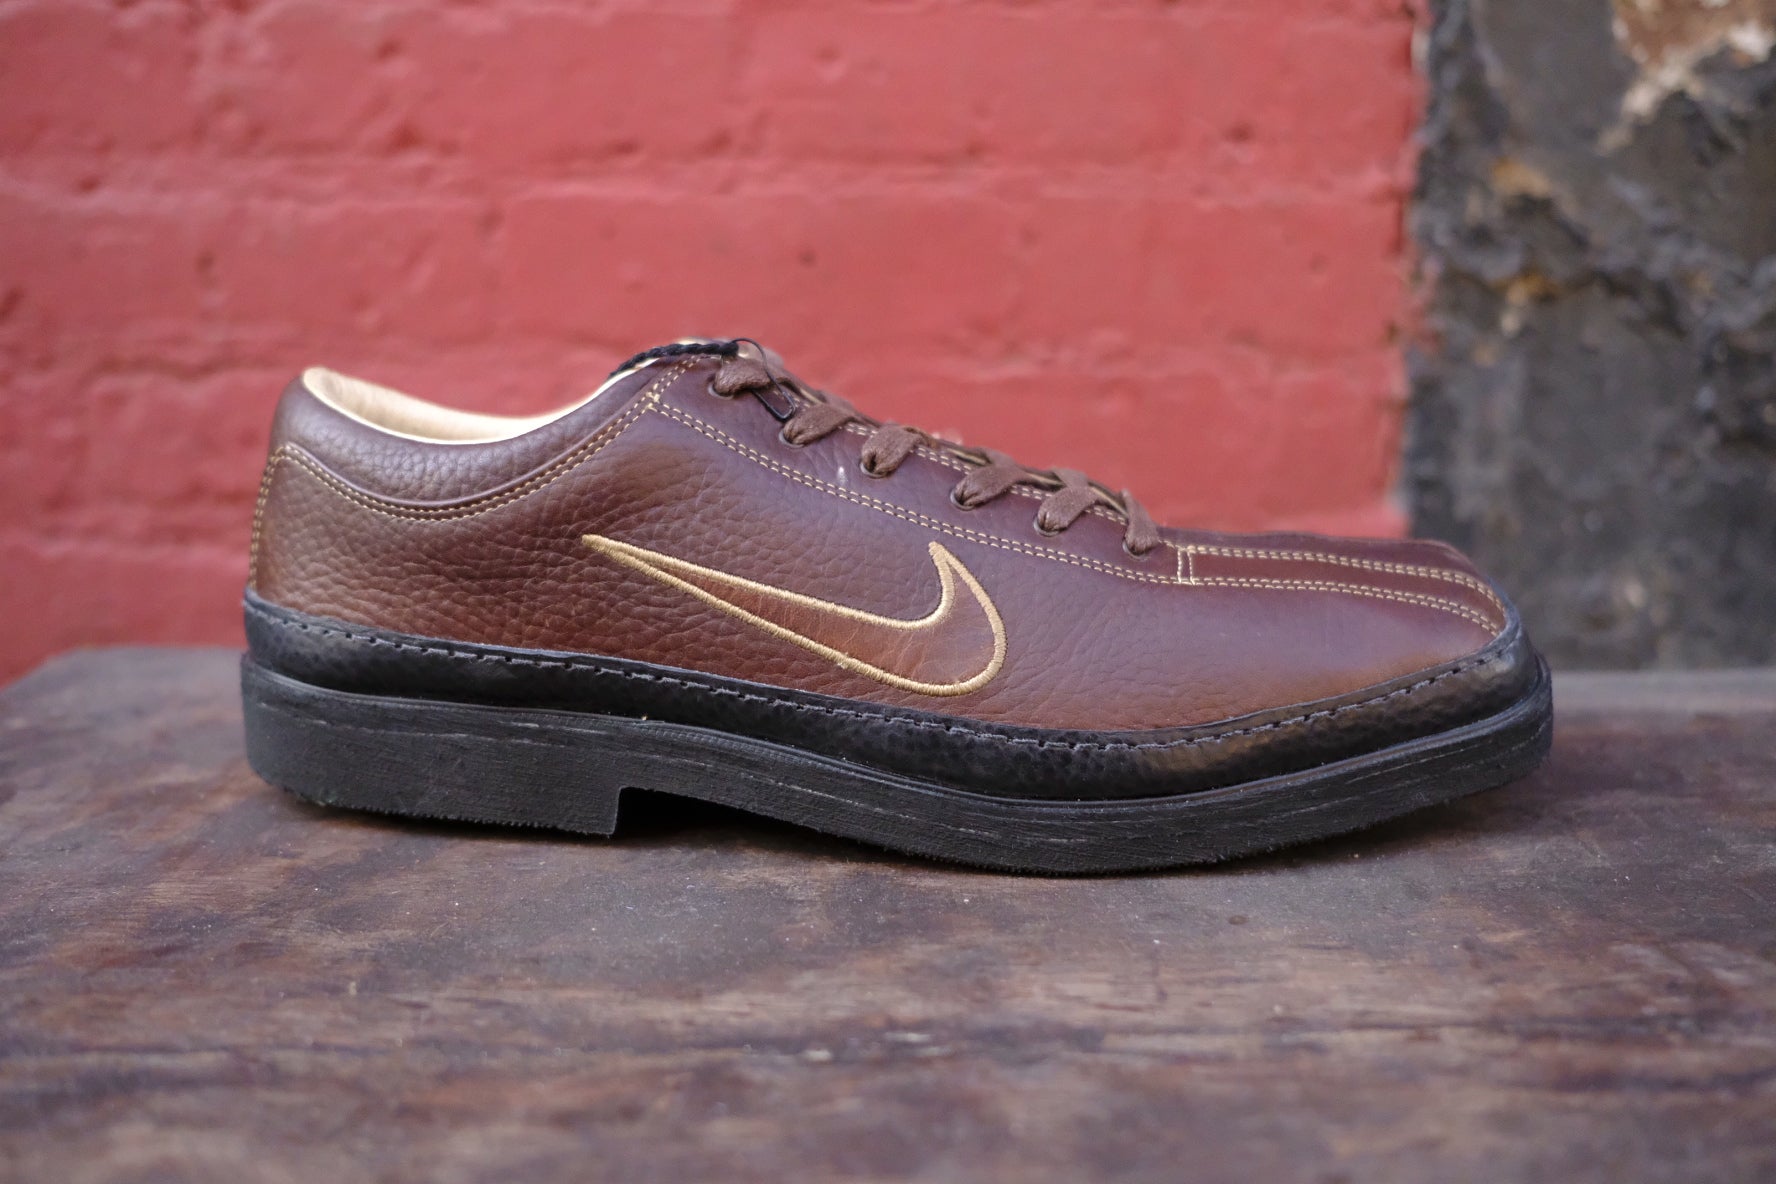 reconstructed 2004 nike golf shoe - m us 9